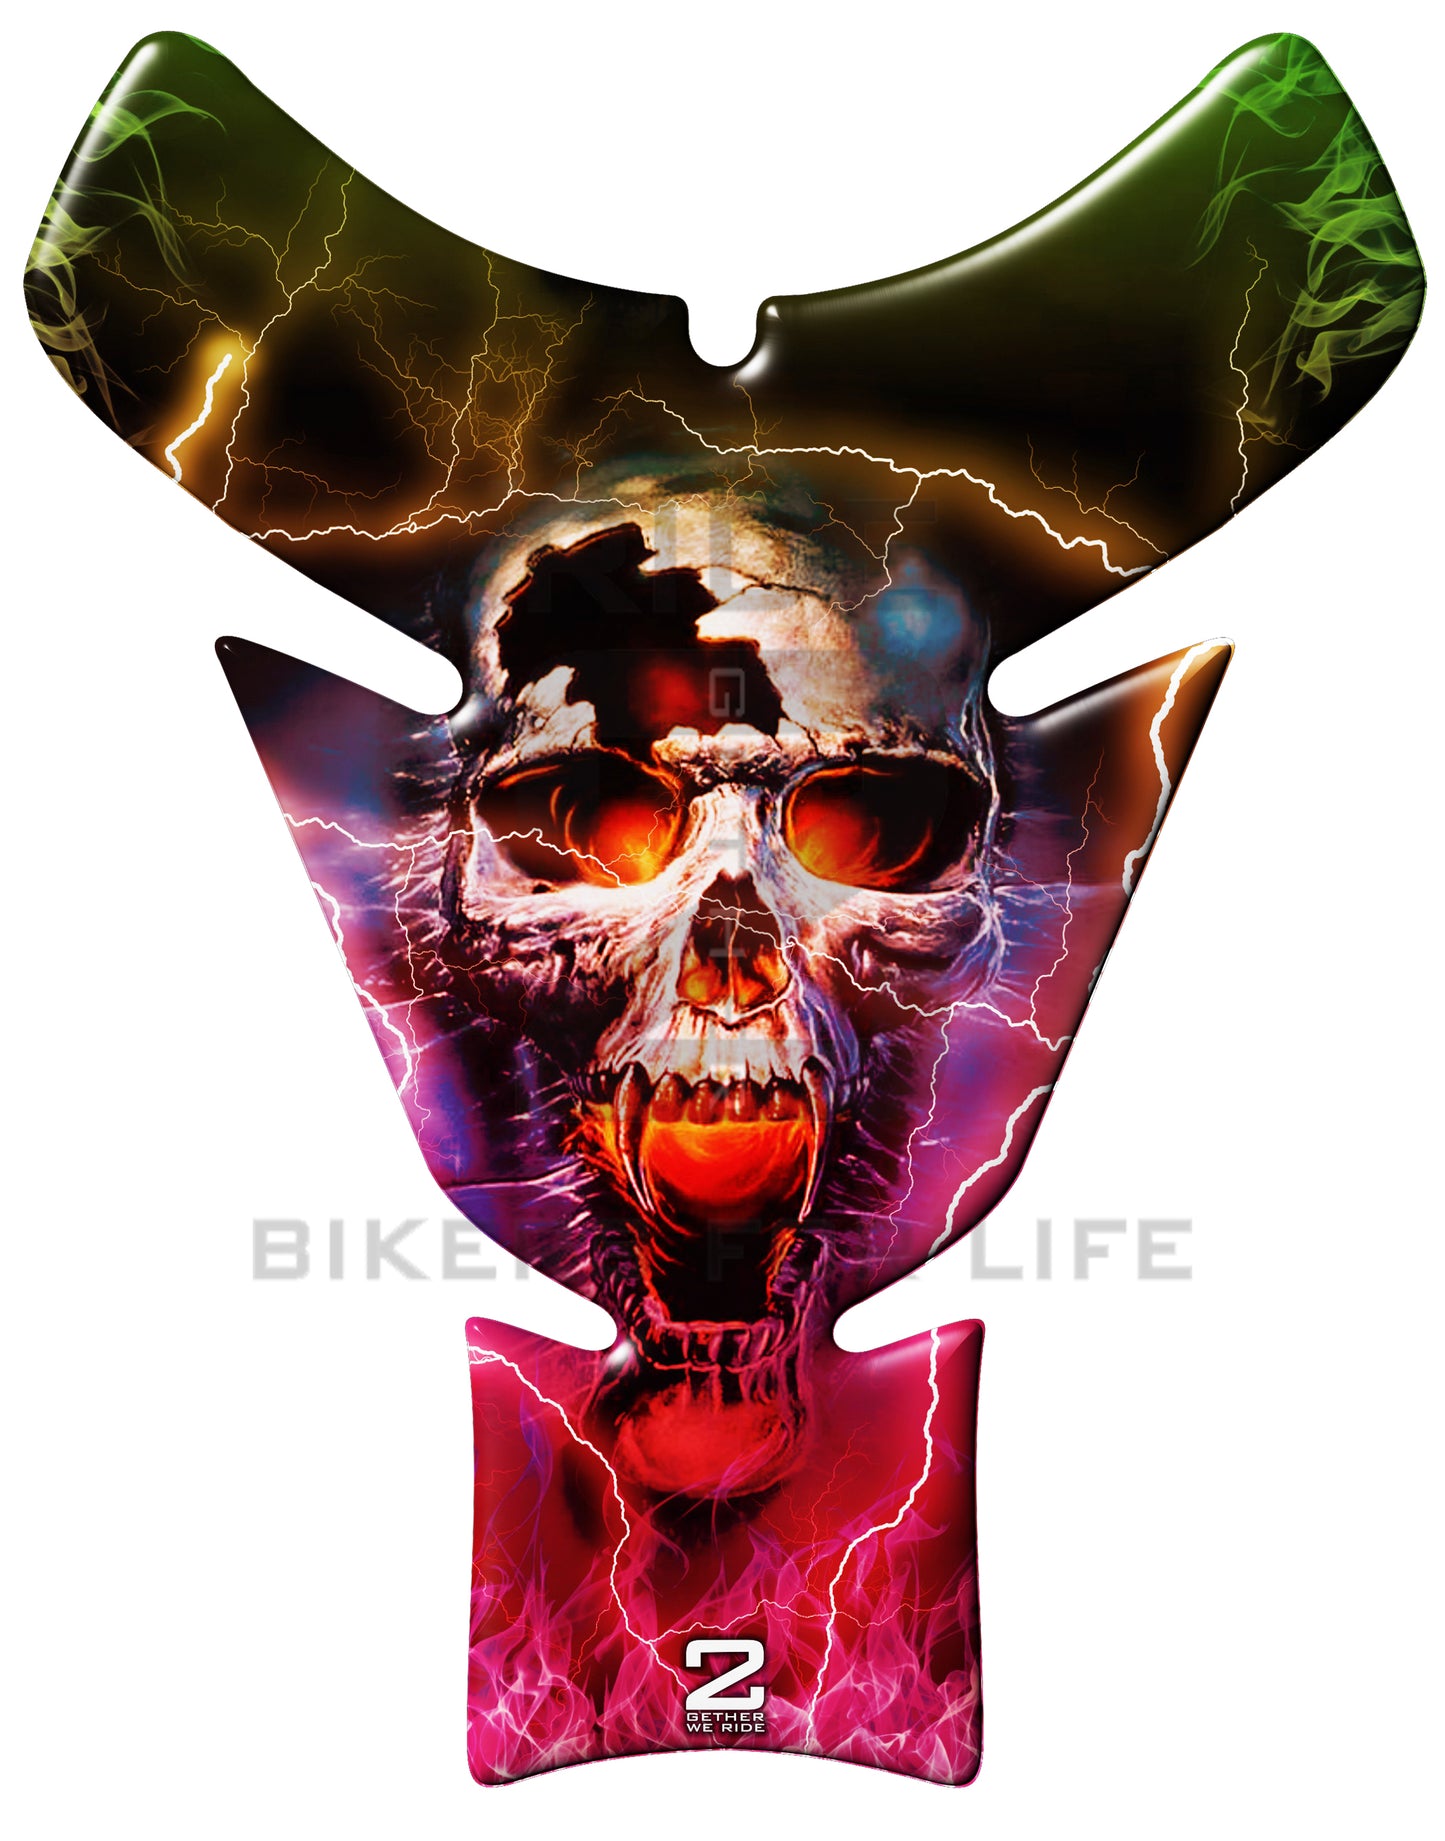 Universal Fit Multi Colour Thunder Flaming Skull Motor Bike Tank Pad Protector. A Street Pad which fits most motorcycles.